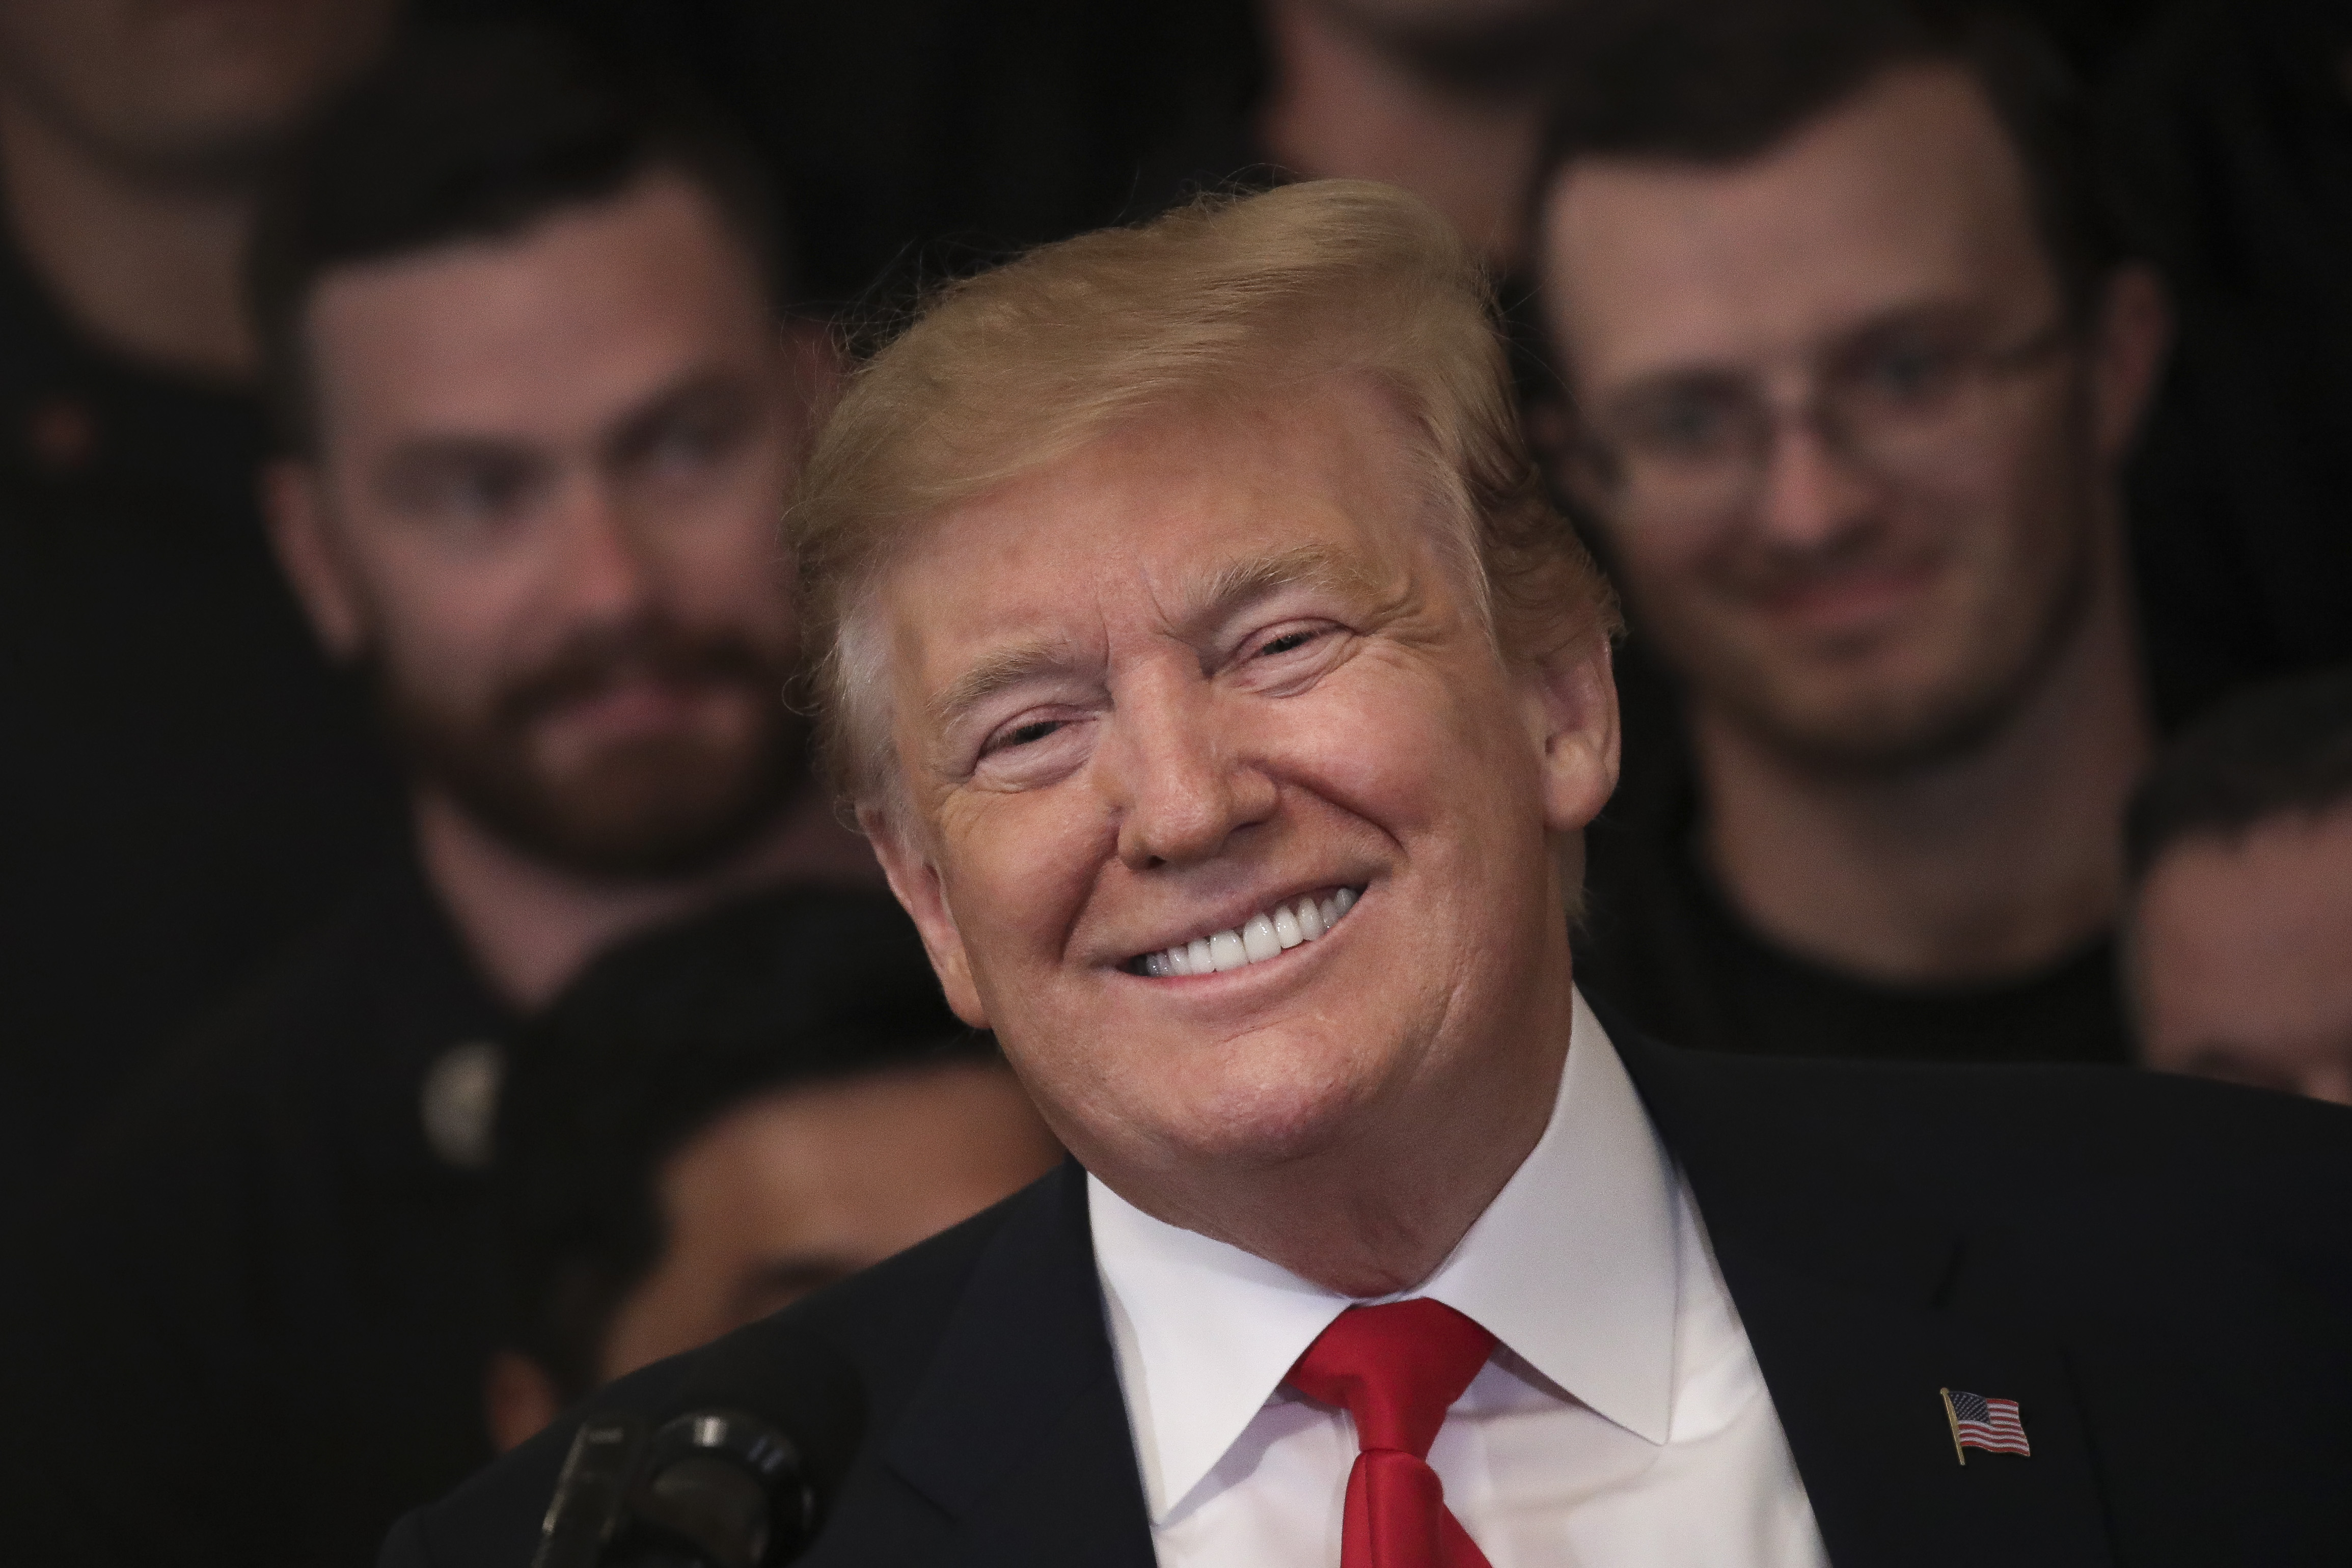 U.S. President Donald Trump smiles during an event recognizing the Wounded Warrior Project Soldier Ride in the East Room of the White House, April 18, 2019 in Washington, DC. (Photo by Drew Angerer/Getty Images)